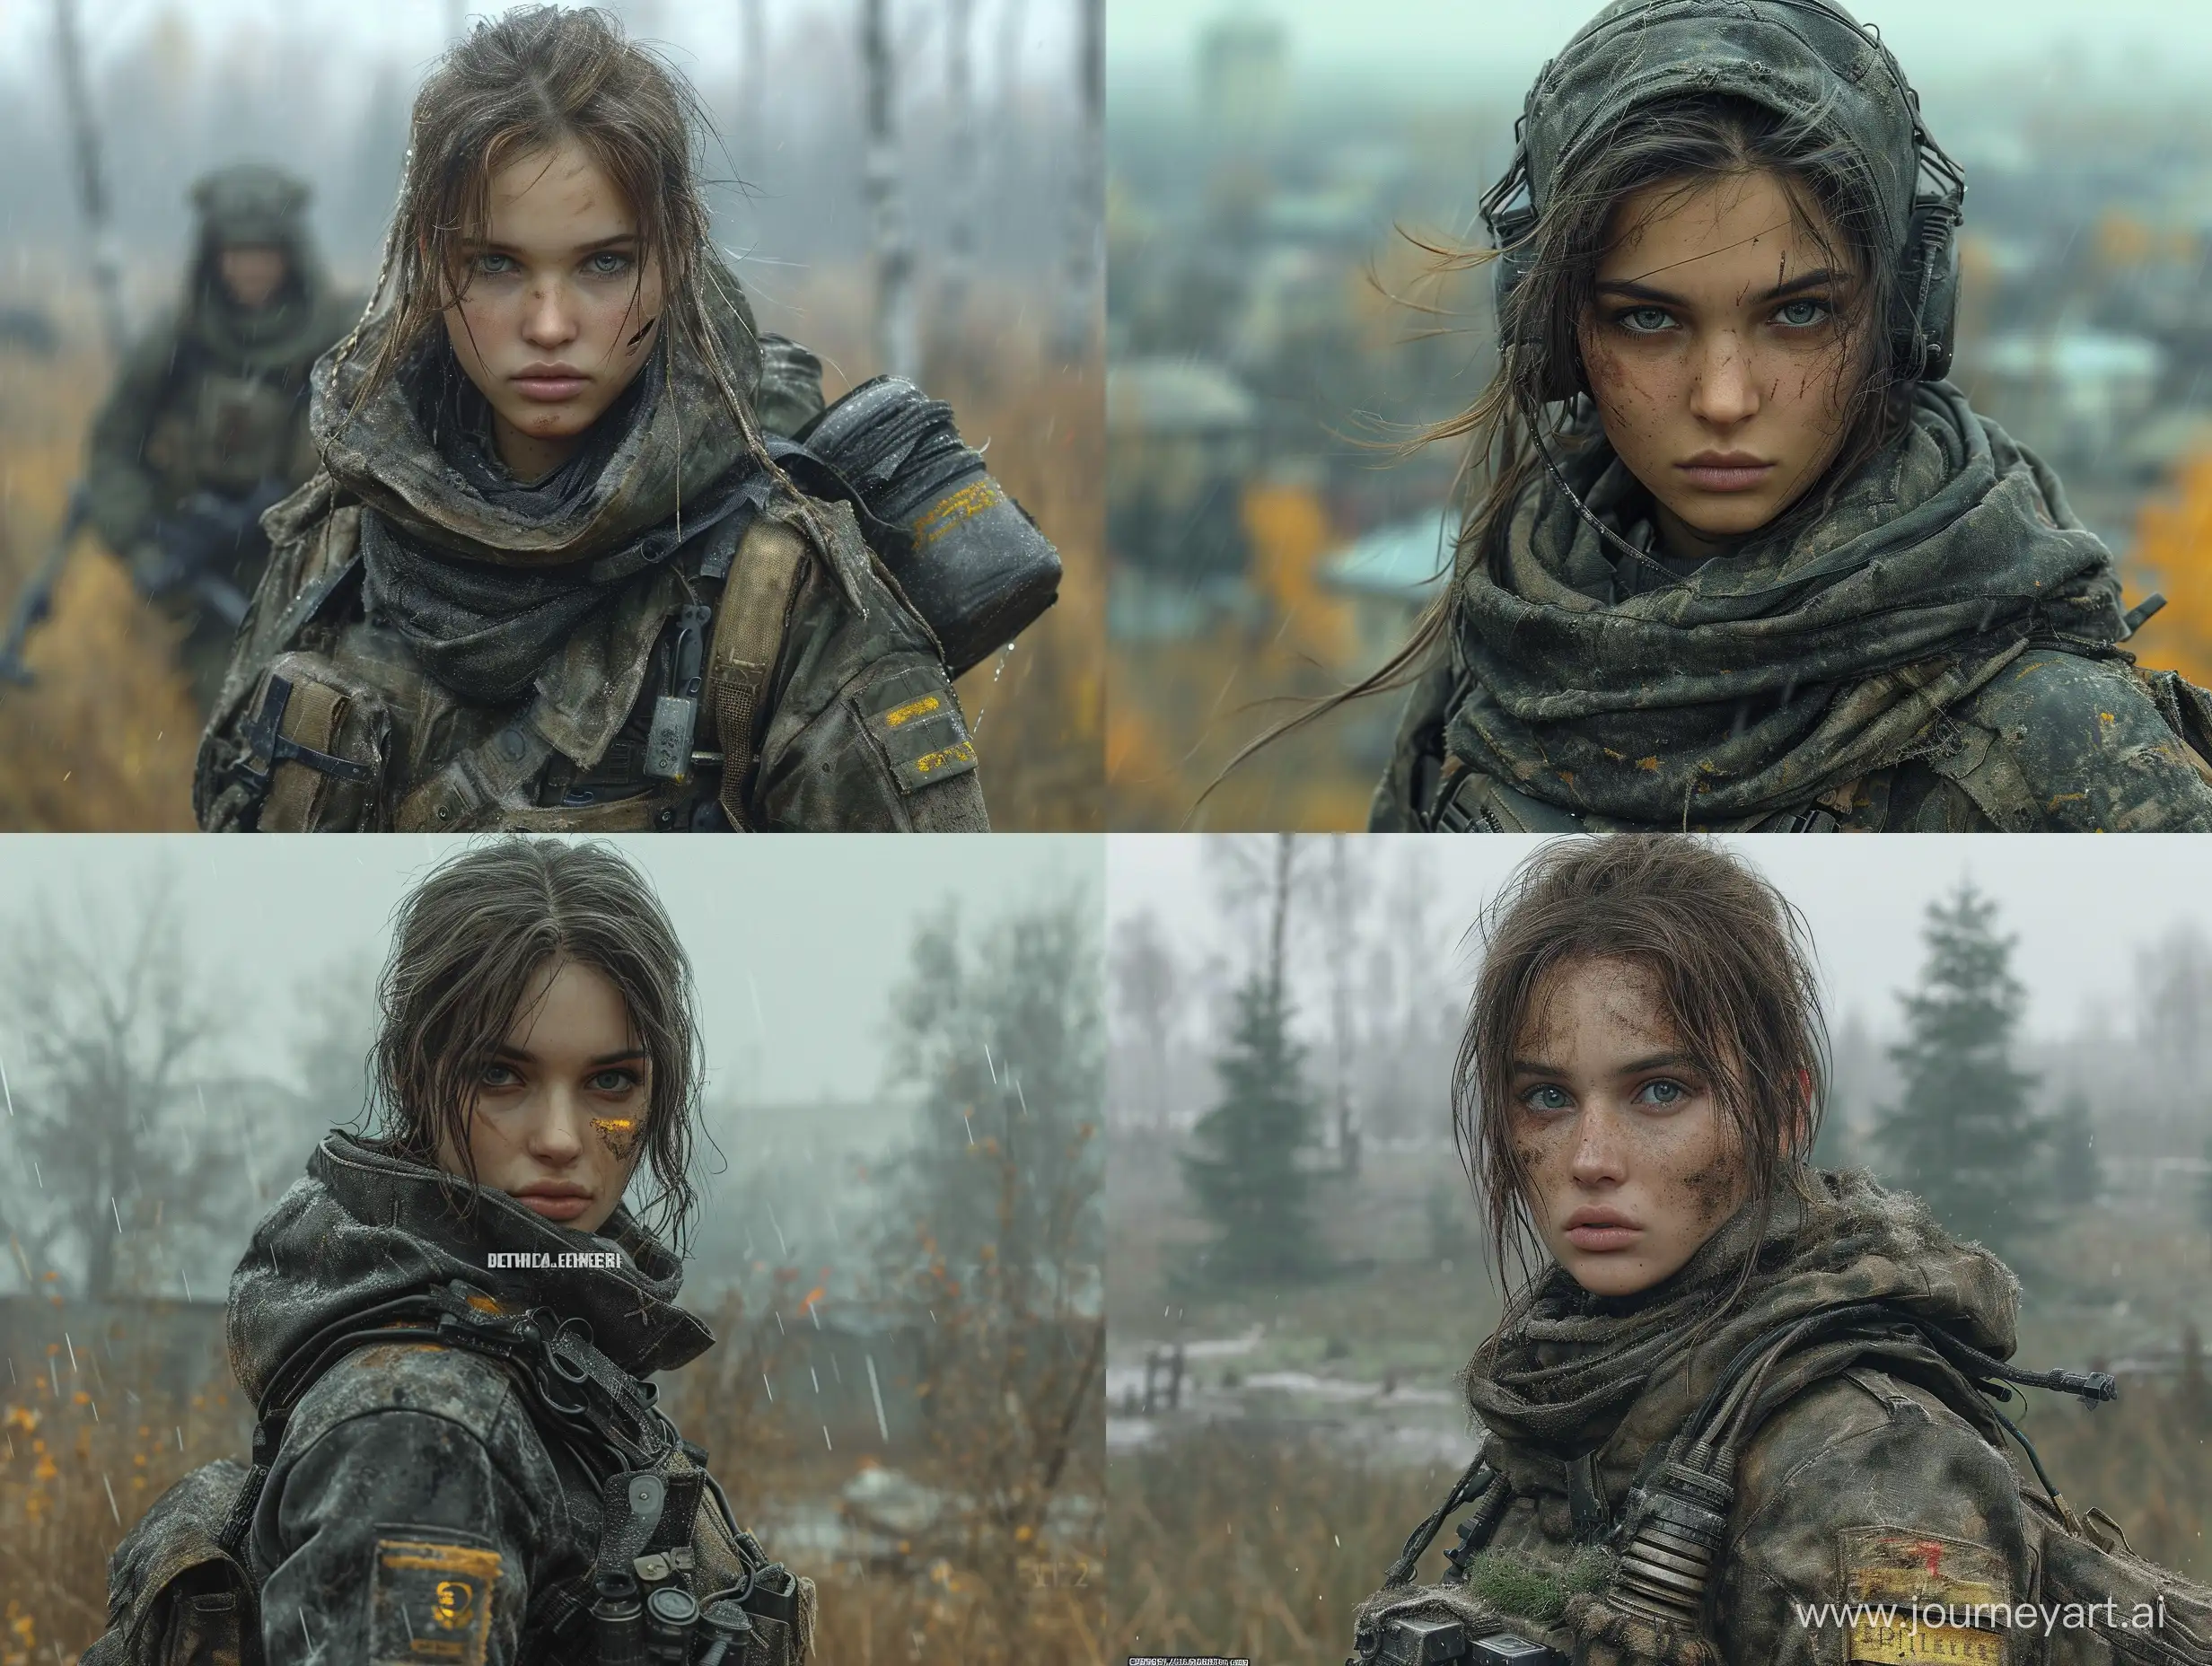 STALKER-Female-Mercenary-in-Black-Tactical-Gear-amidst-Dead-City-and-Trees